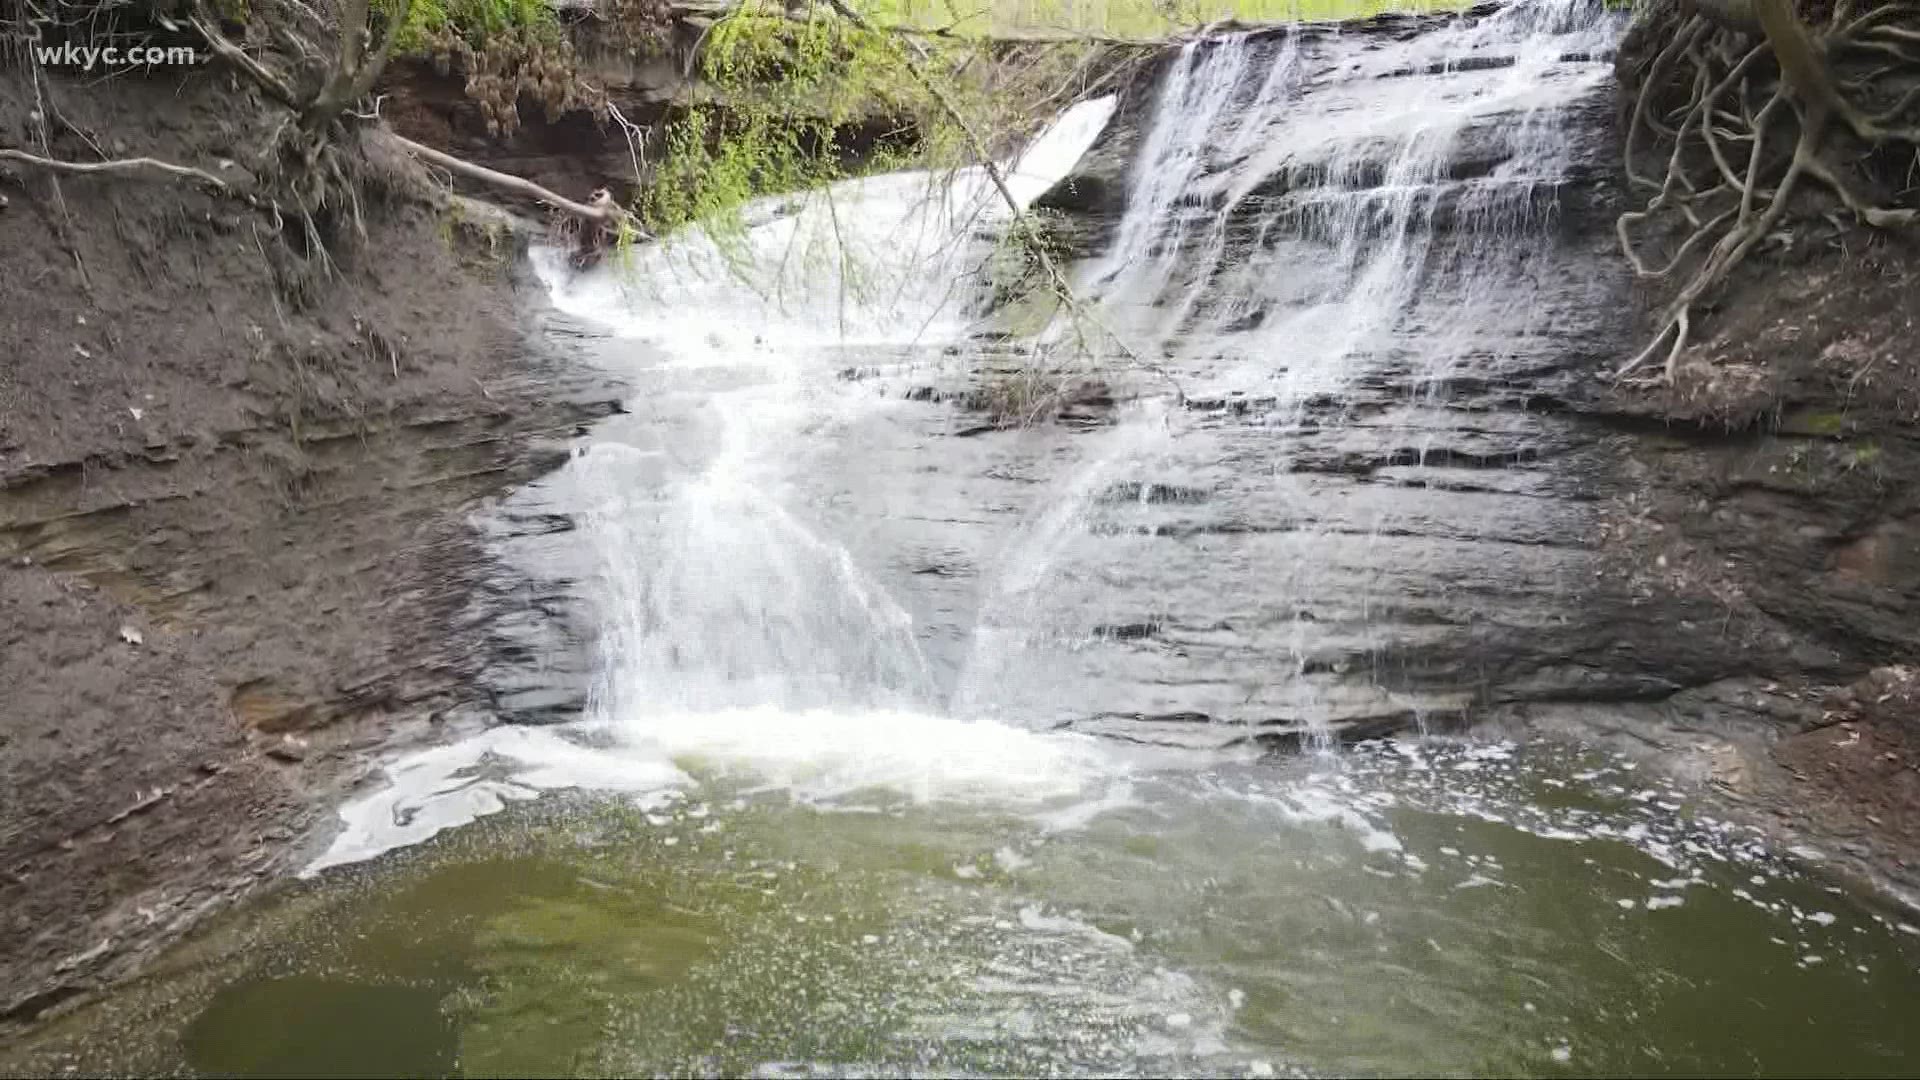 We're exploring Chair Factory Falls with 3News' Matt Standridge in this edition of 'GO-HIO.'